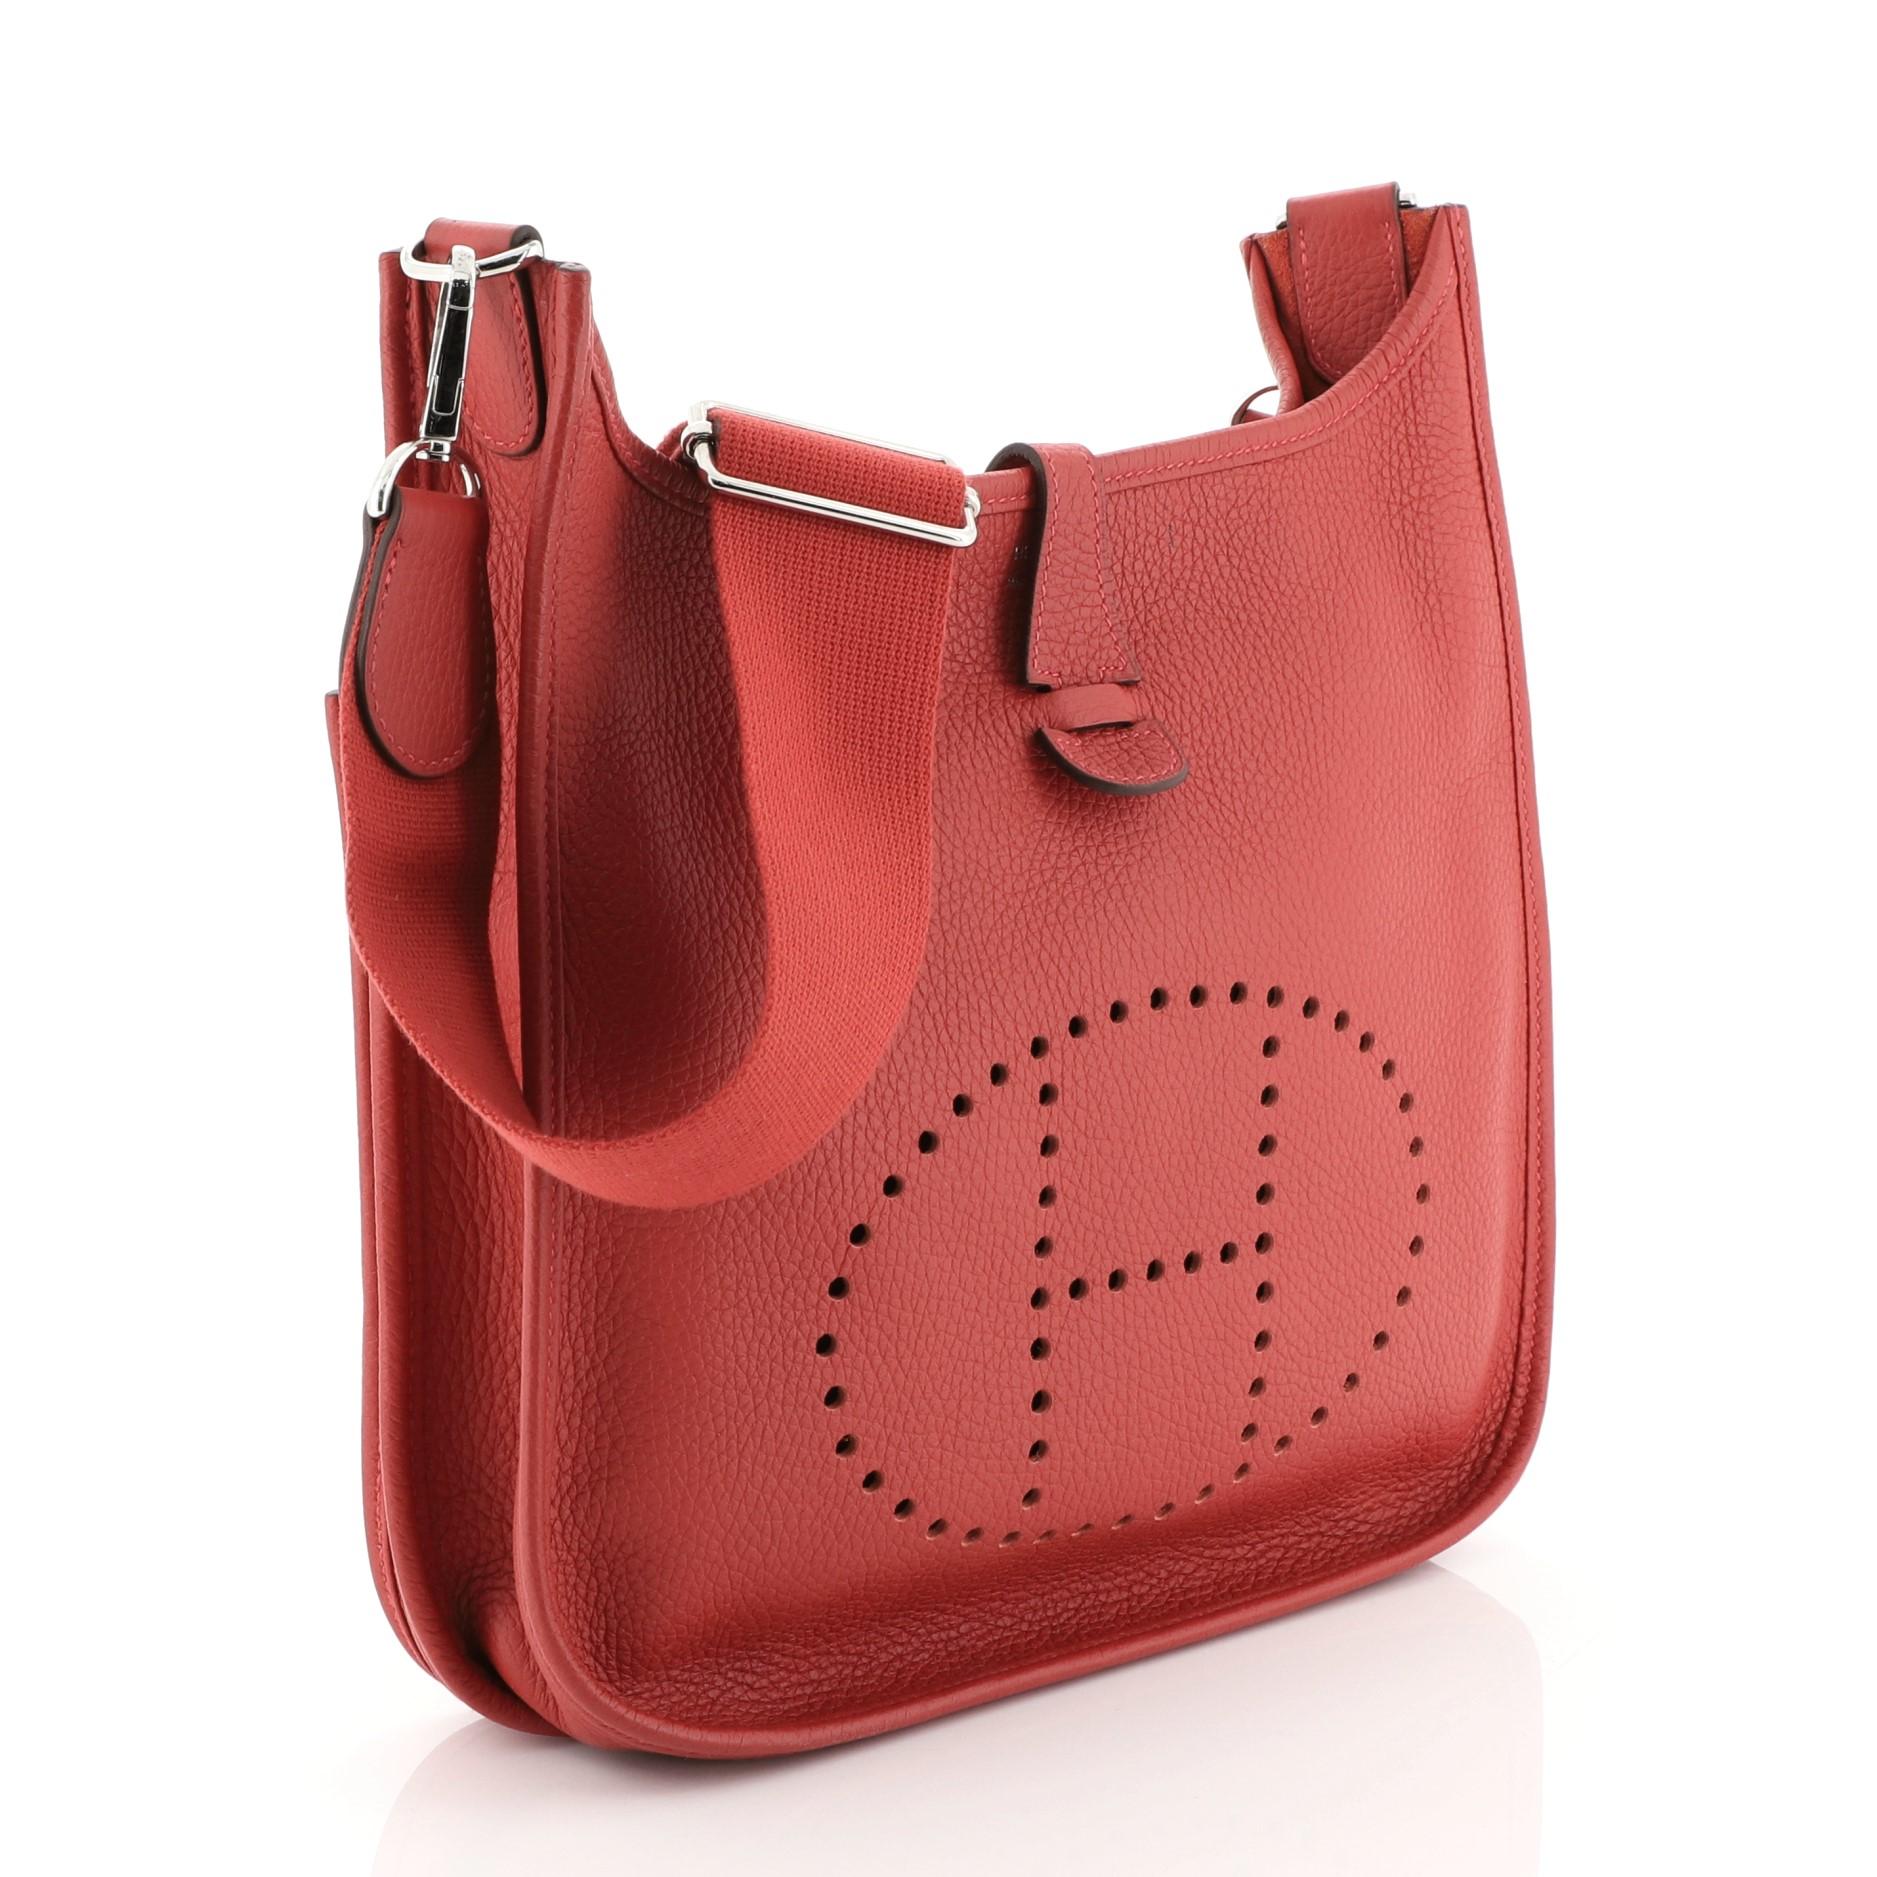 This Hermes Evelyne Crossbody Gen III Togo PM, crafted in Rouge Casaque red Clemence leather, features perforated H design at the front, accessible back pocket, adjustable textile shoulder strap, and palladium hardware. It opens to a Rouge Casaque